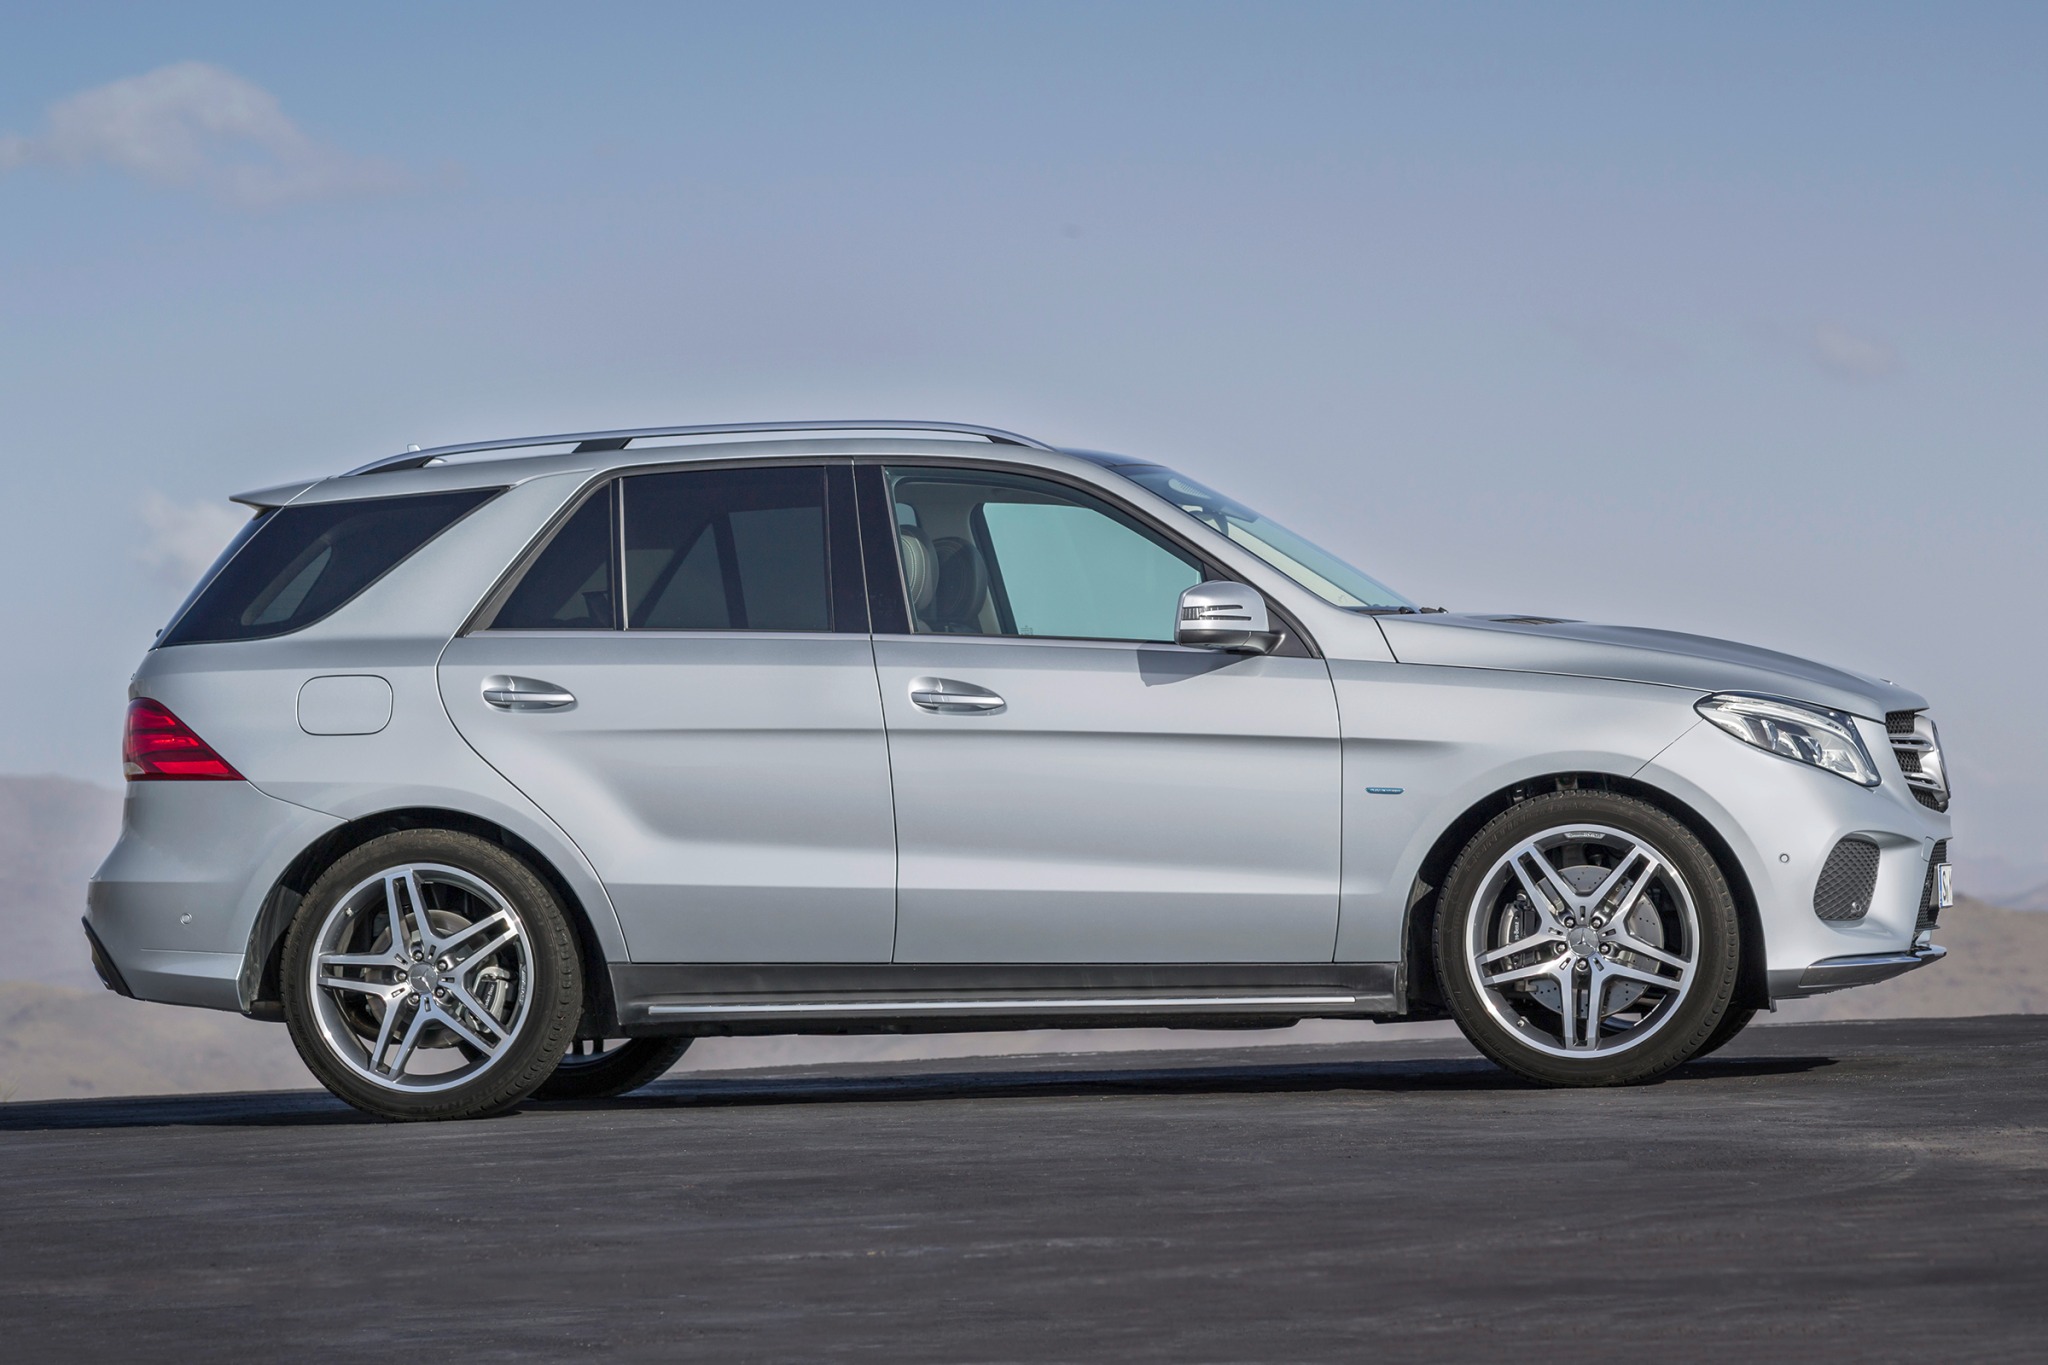 2016 Mercedes-Benz GLE-Class VIN Number Search - AutoDetective